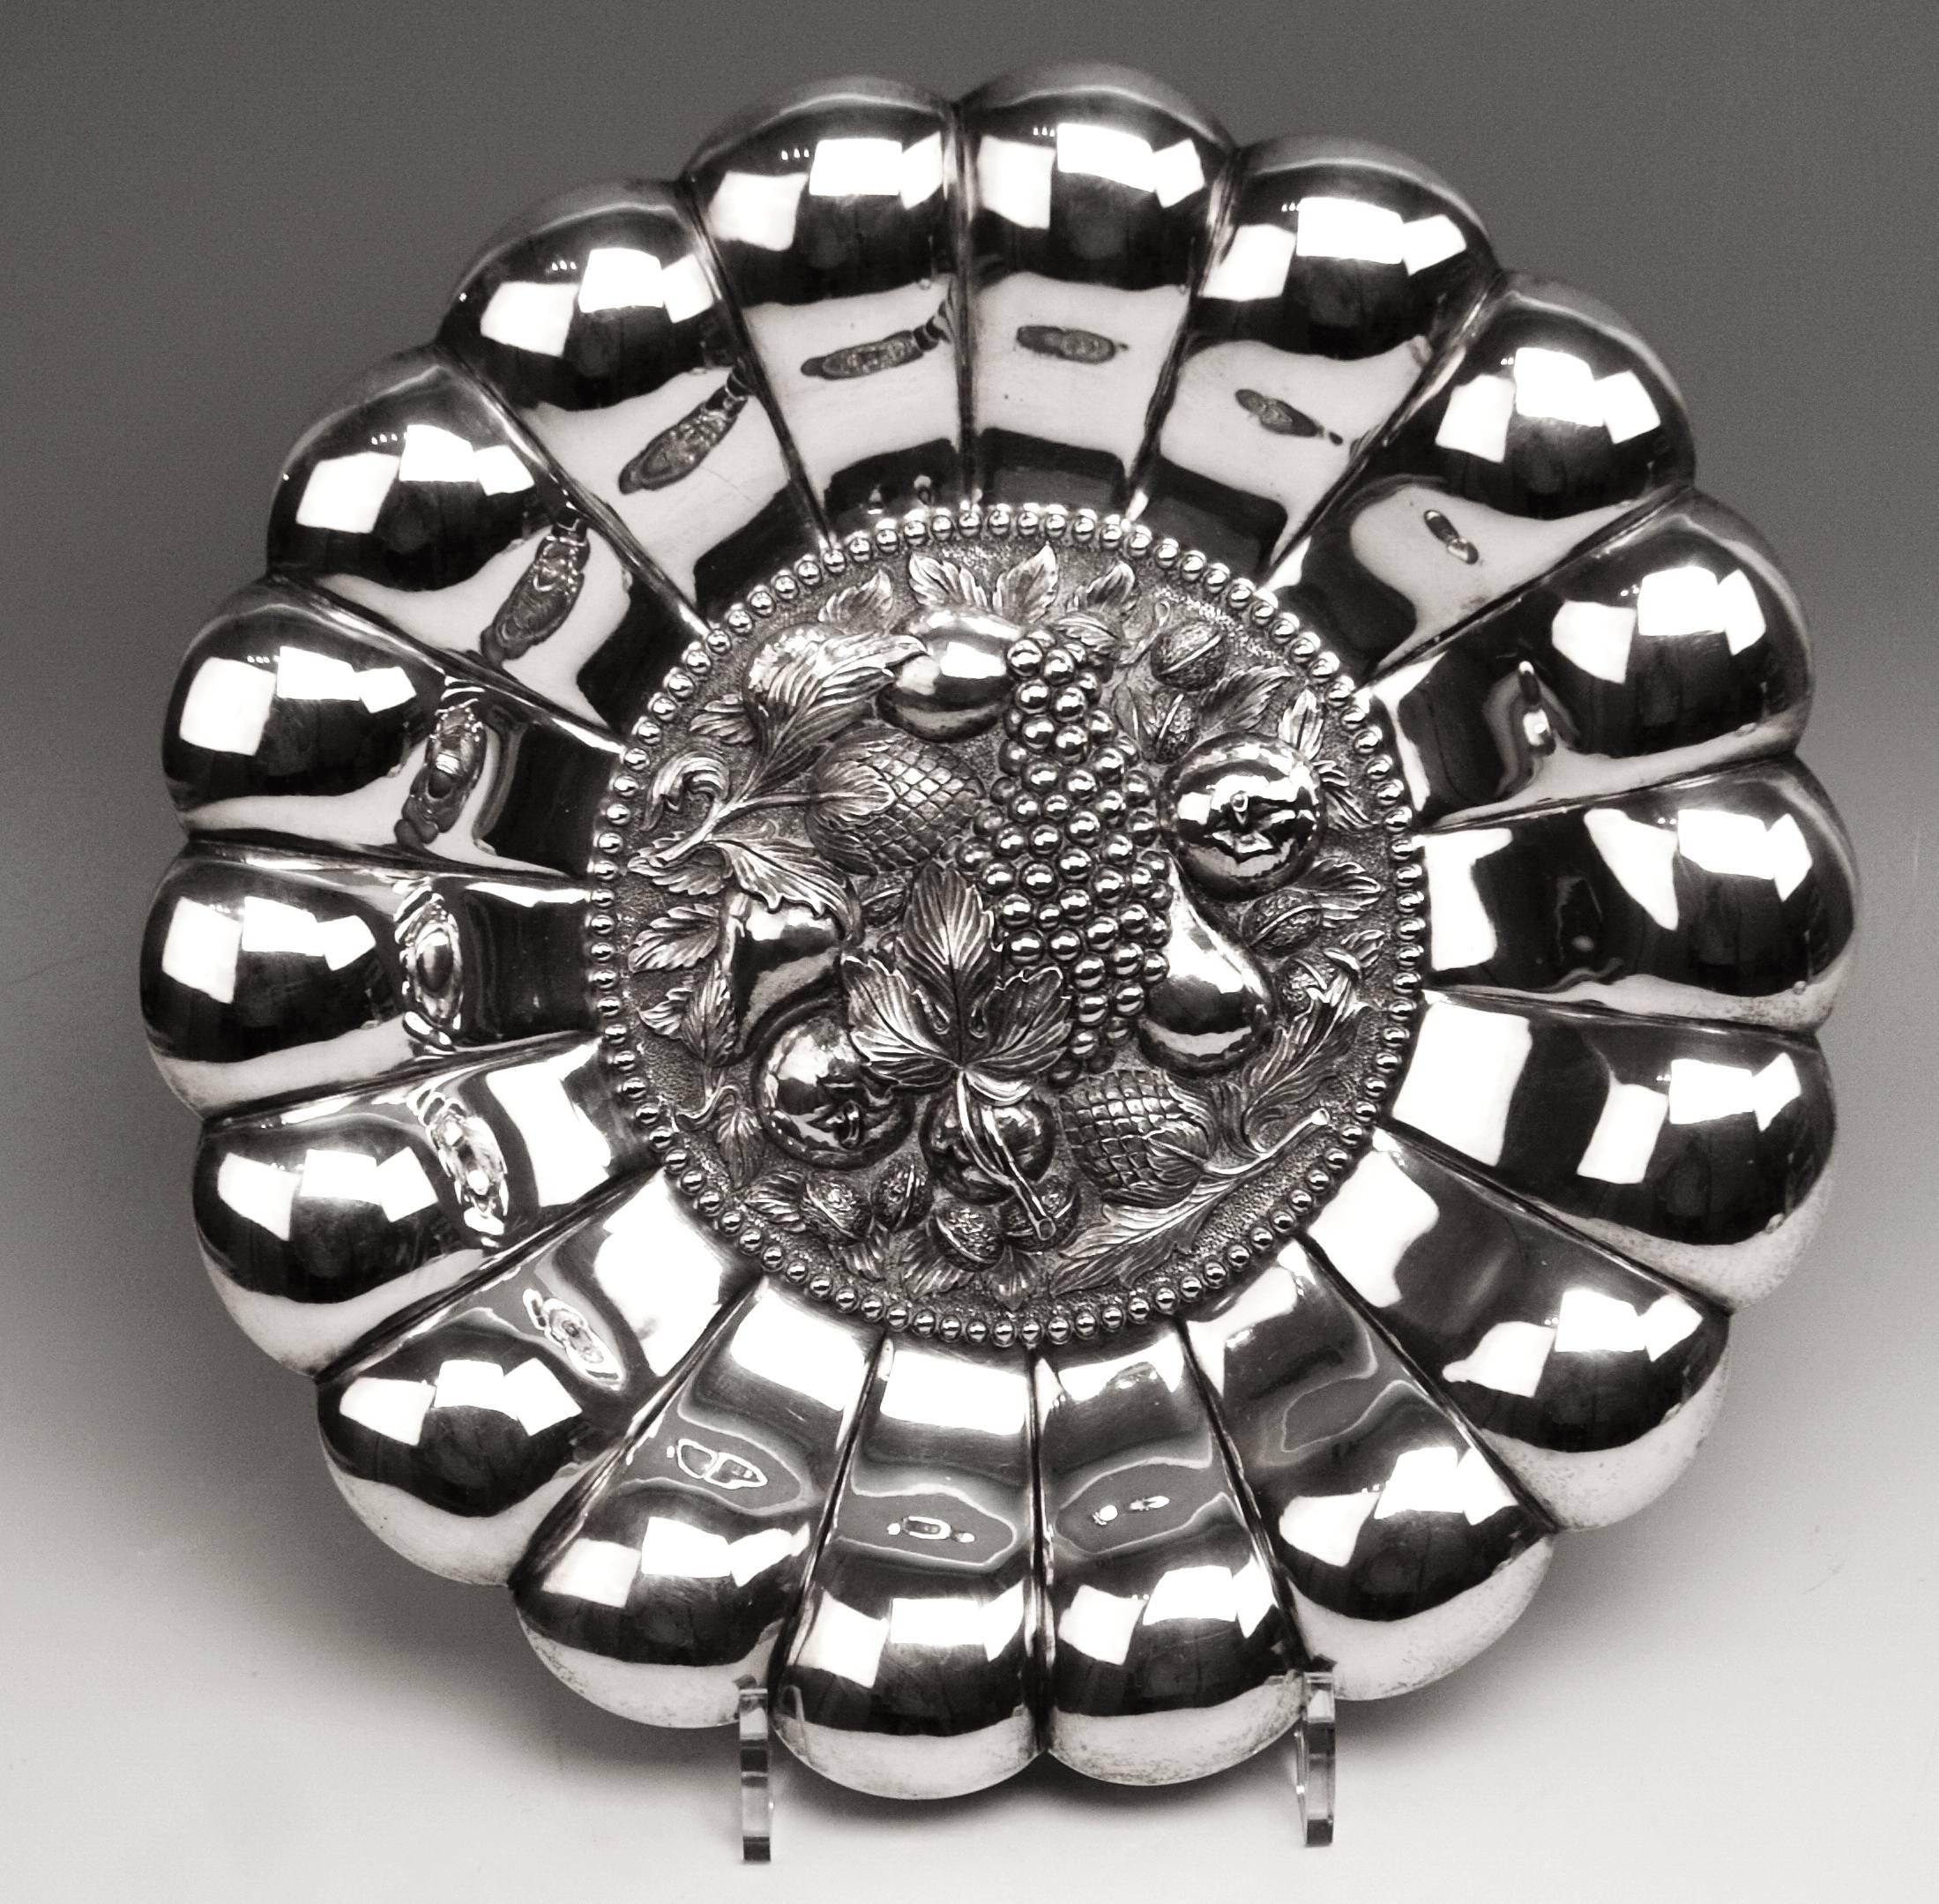 Stunning nicest silver plate with sculptured decorations in middle area
Hallmarked (Viennese silver) 
Manufactured, circa 1890

It is an outstanding quite large silver plate of finest manufacturing quality:
Referring to style, it is made in